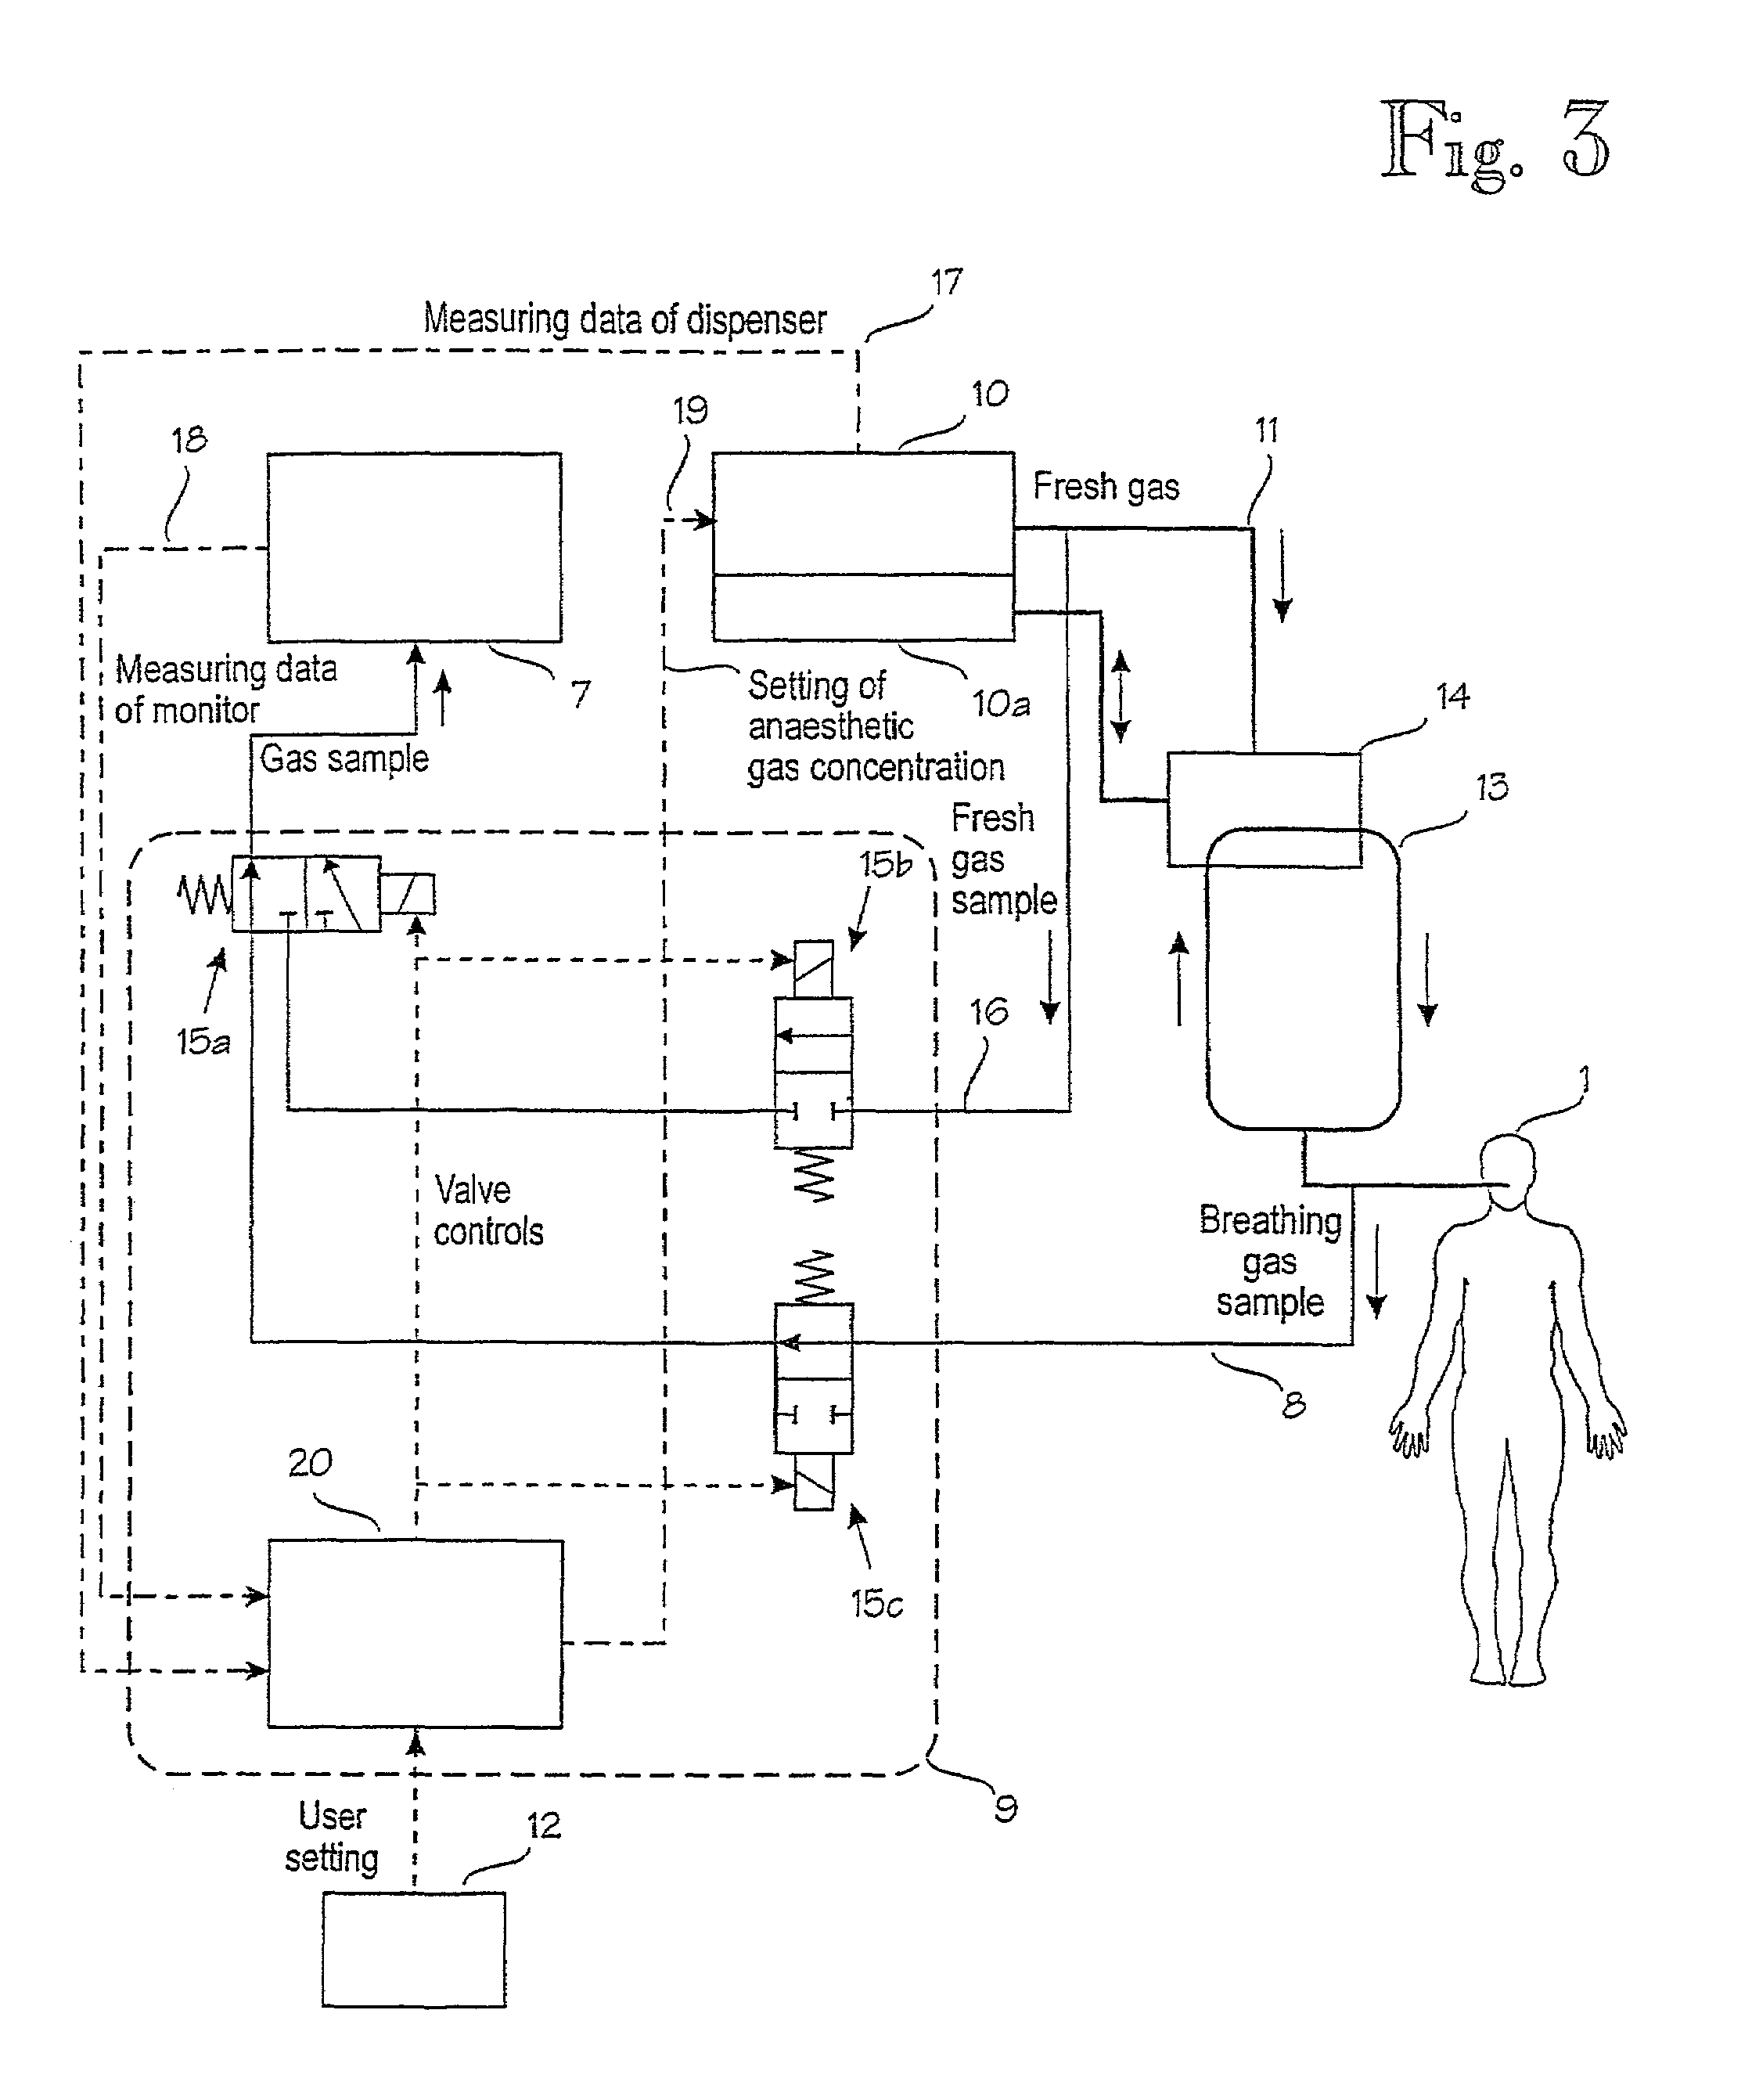 Arrangement in connection with feedback control system